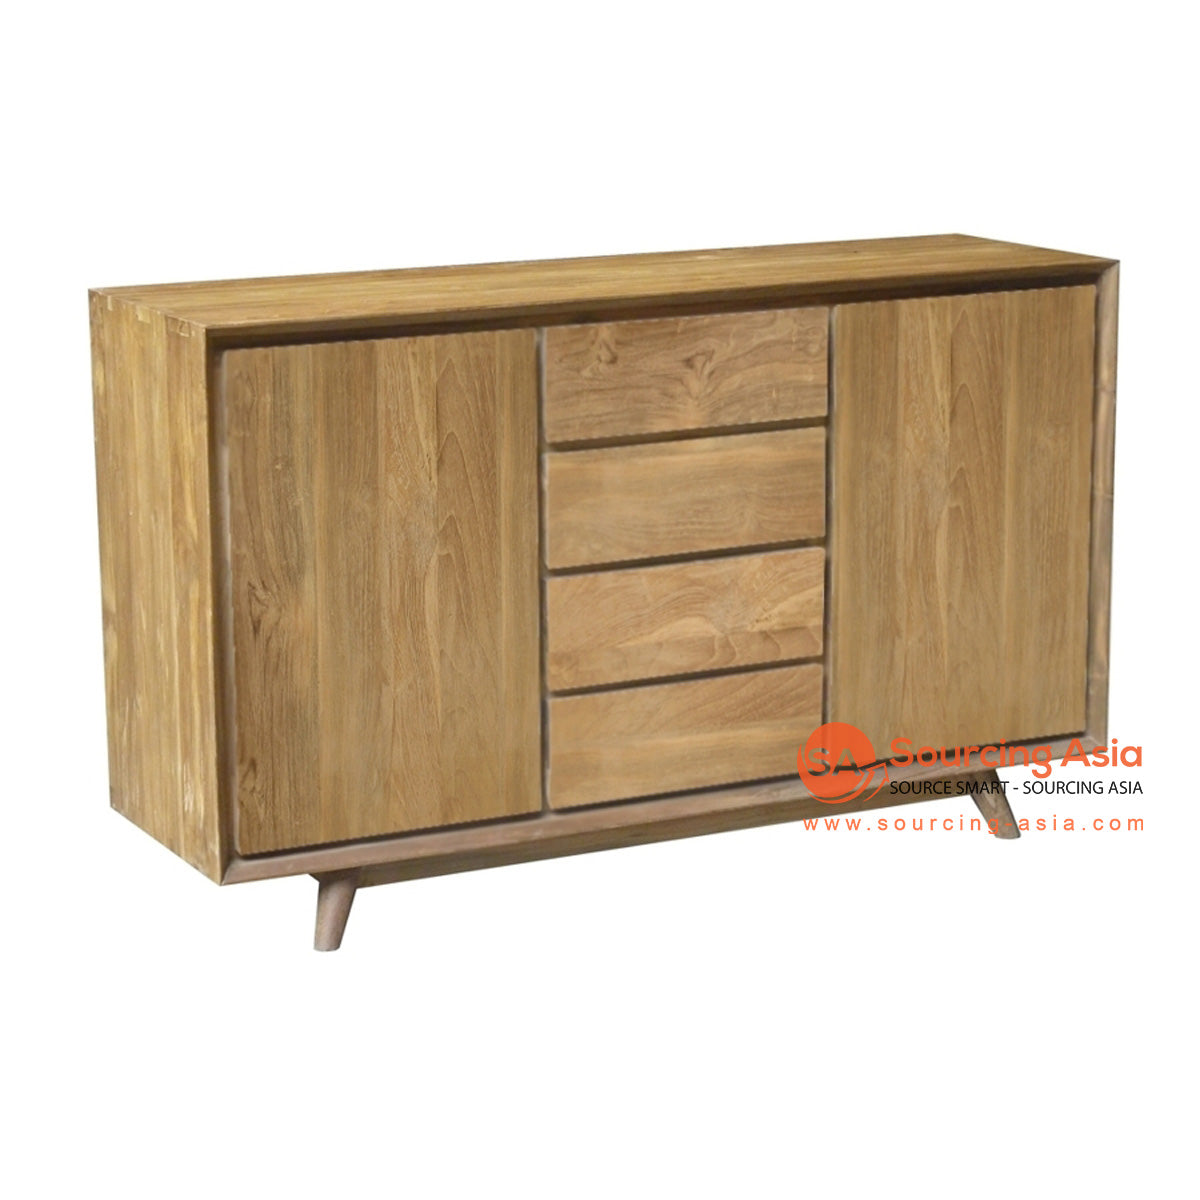 ECL318 NATURAL RECYCLED TEAK WOOD TWO DOORS AND FOUR DRAWERS RETRO BUFFET